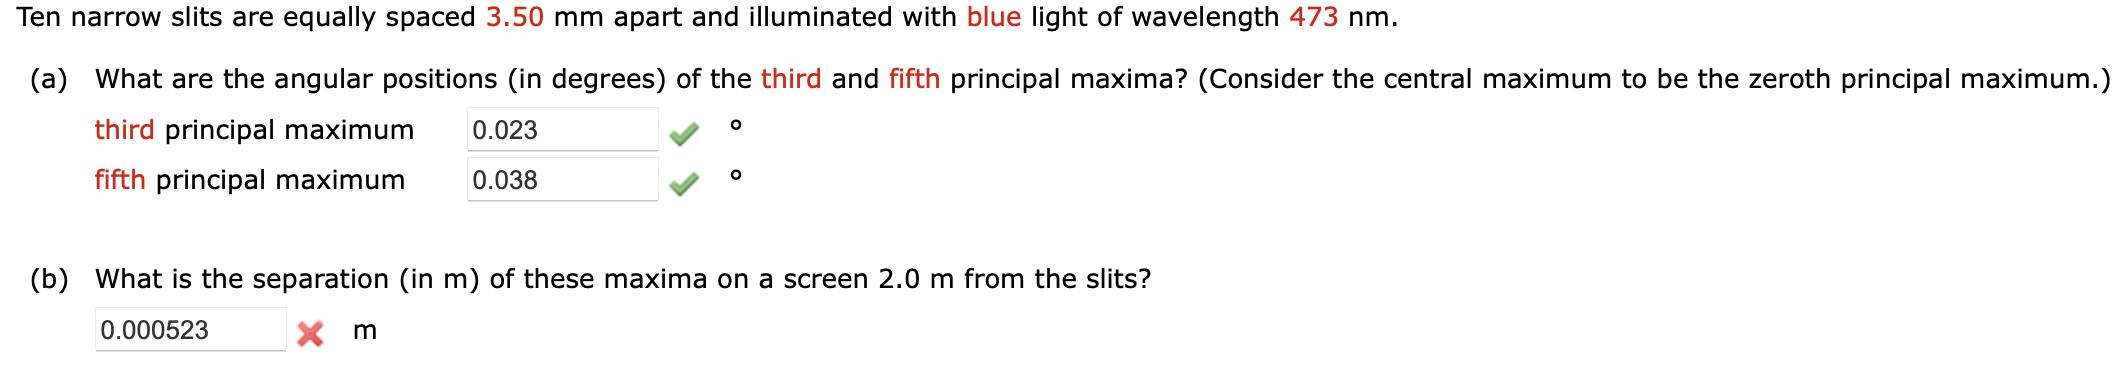 Ten narrow slits are equally spaced ( 3.50 mathrm{~mm} ) apart and illuminated with blue light of wavelength ( 473 mathr